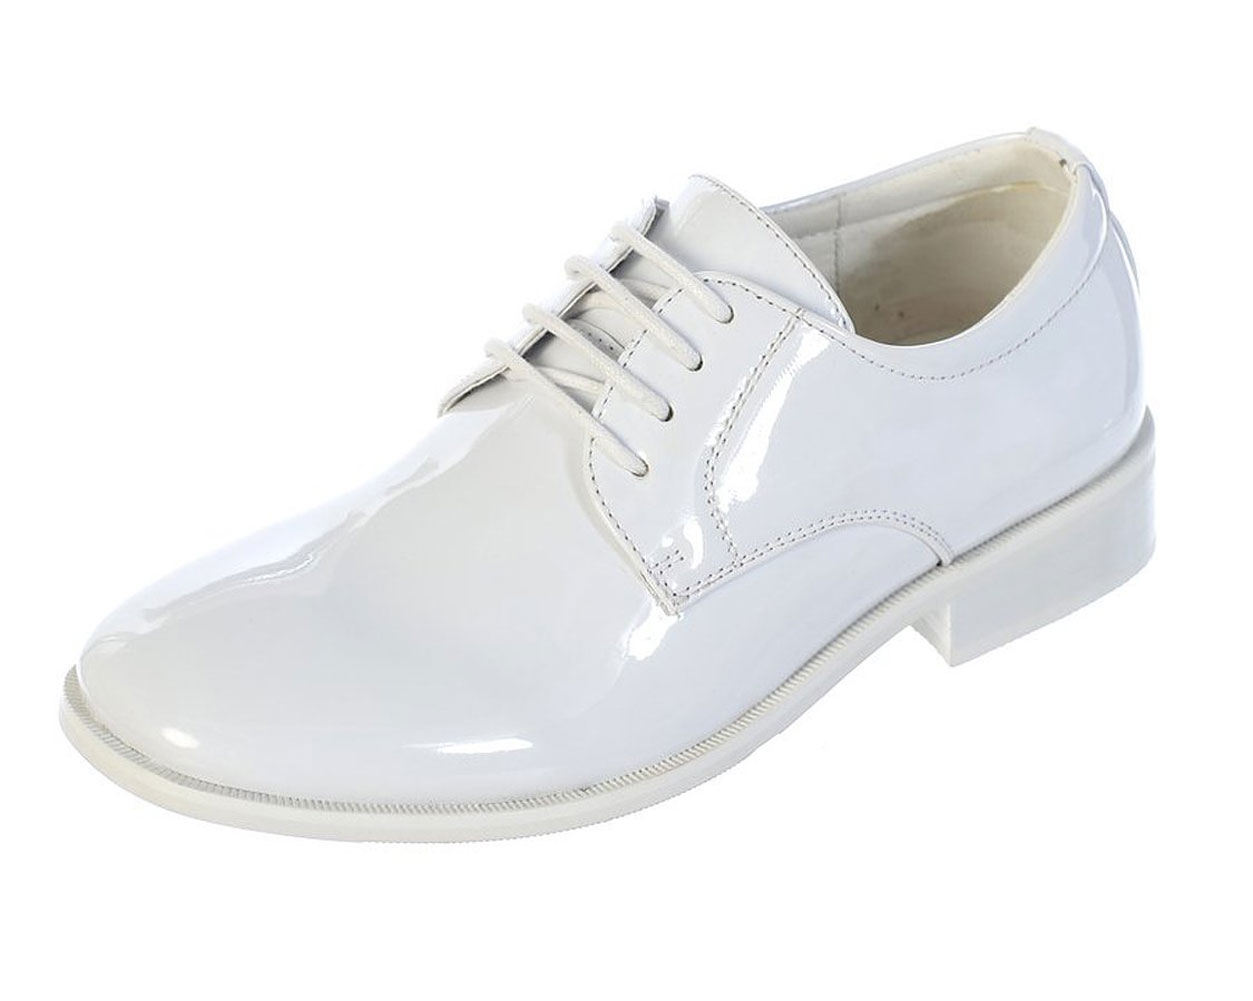 Avery Hill Boys Shiny or Shiny Patent Leather Shoes Wh Shiny Toddler 5